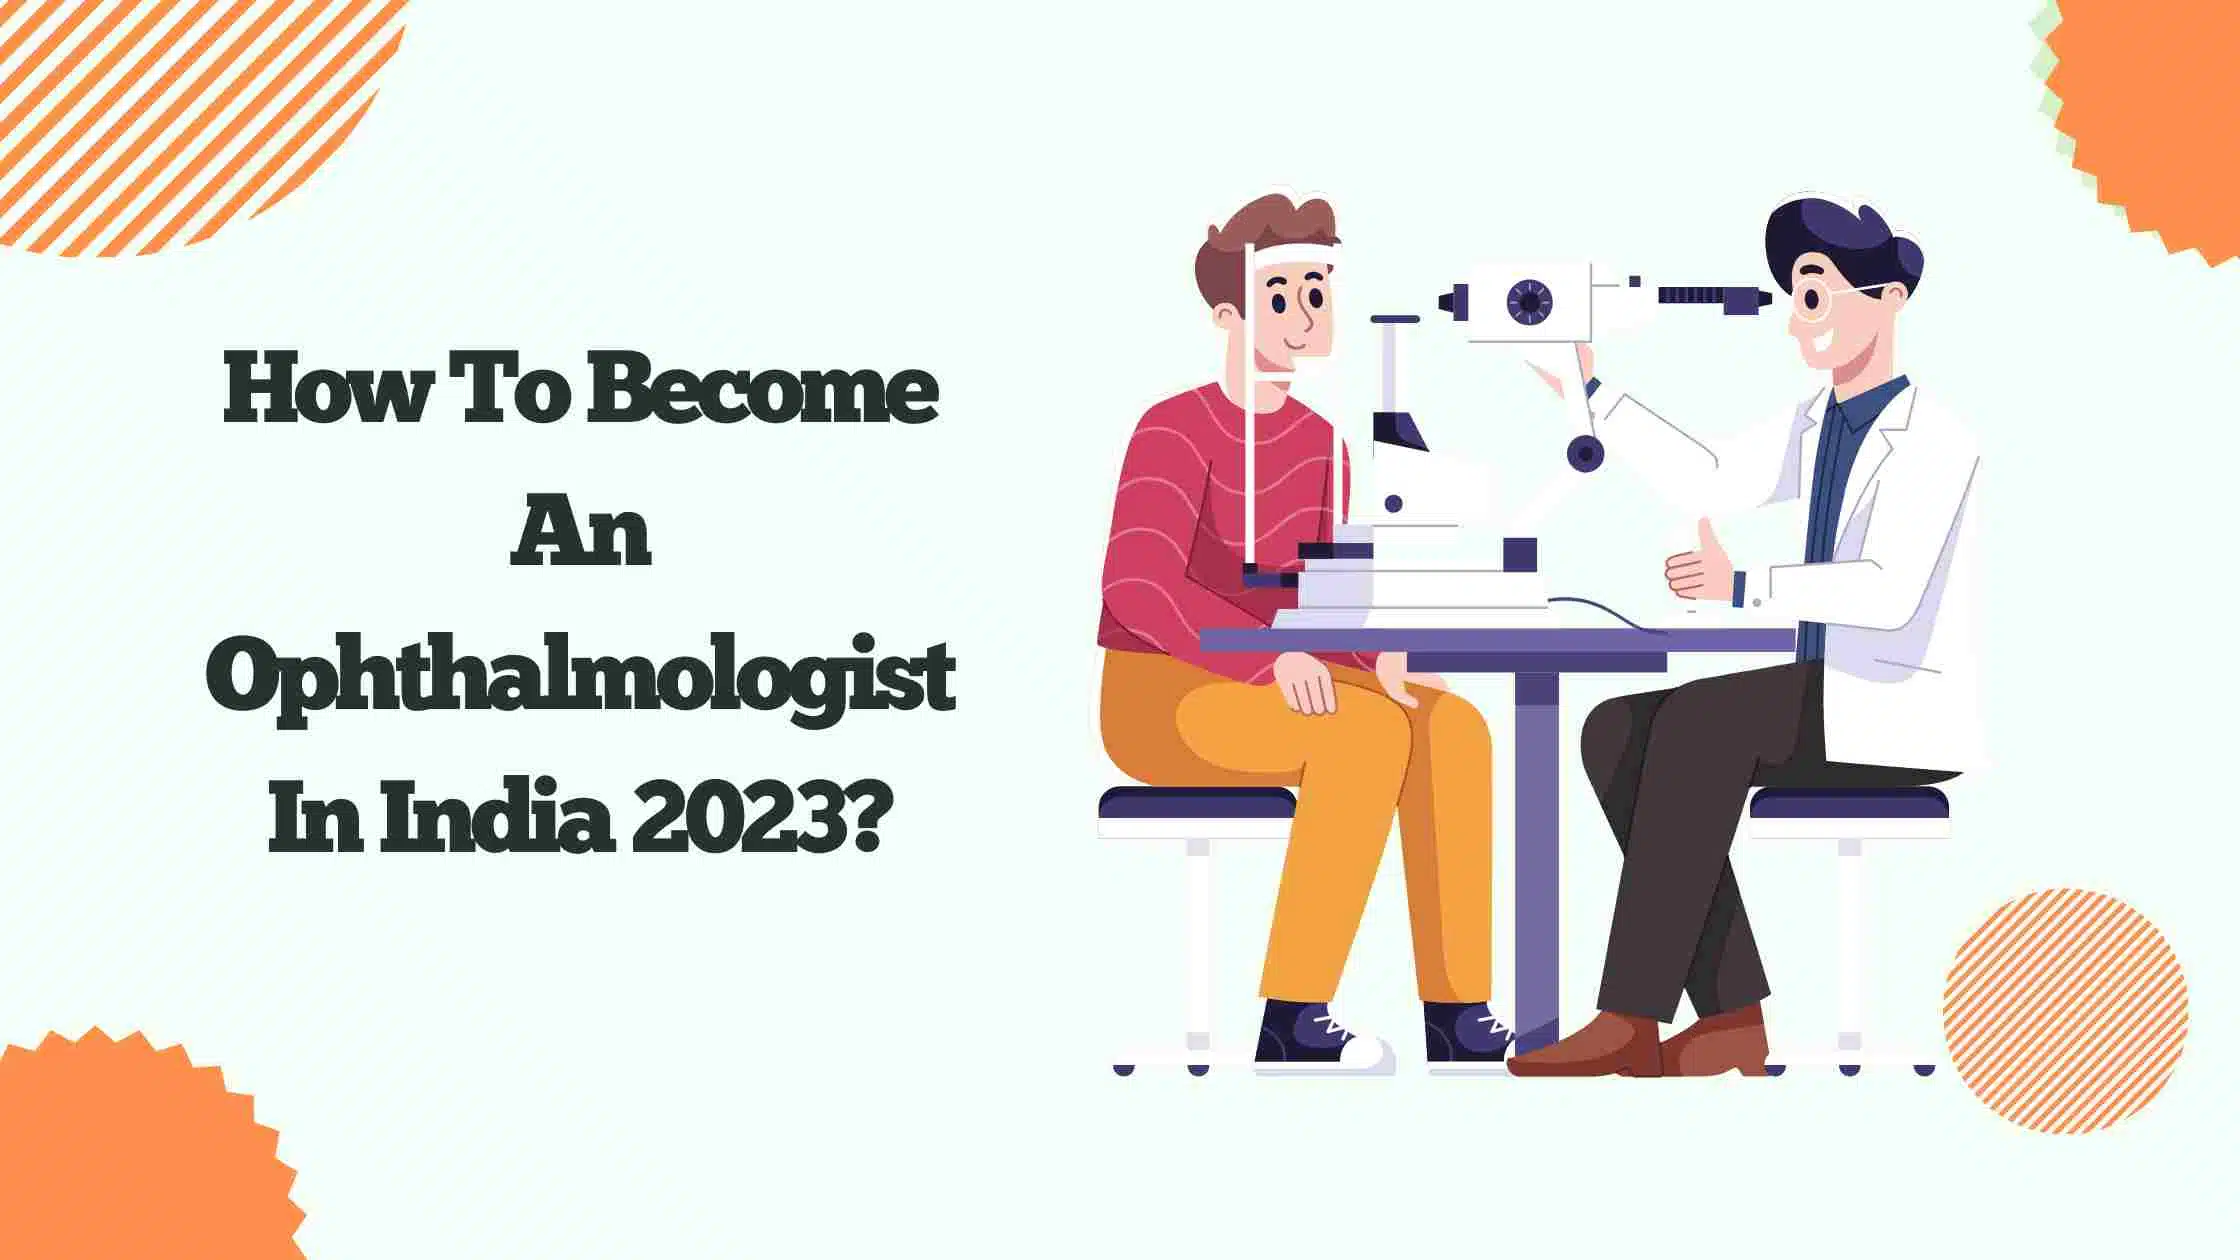 How To Become An Ophthalmologist In India 